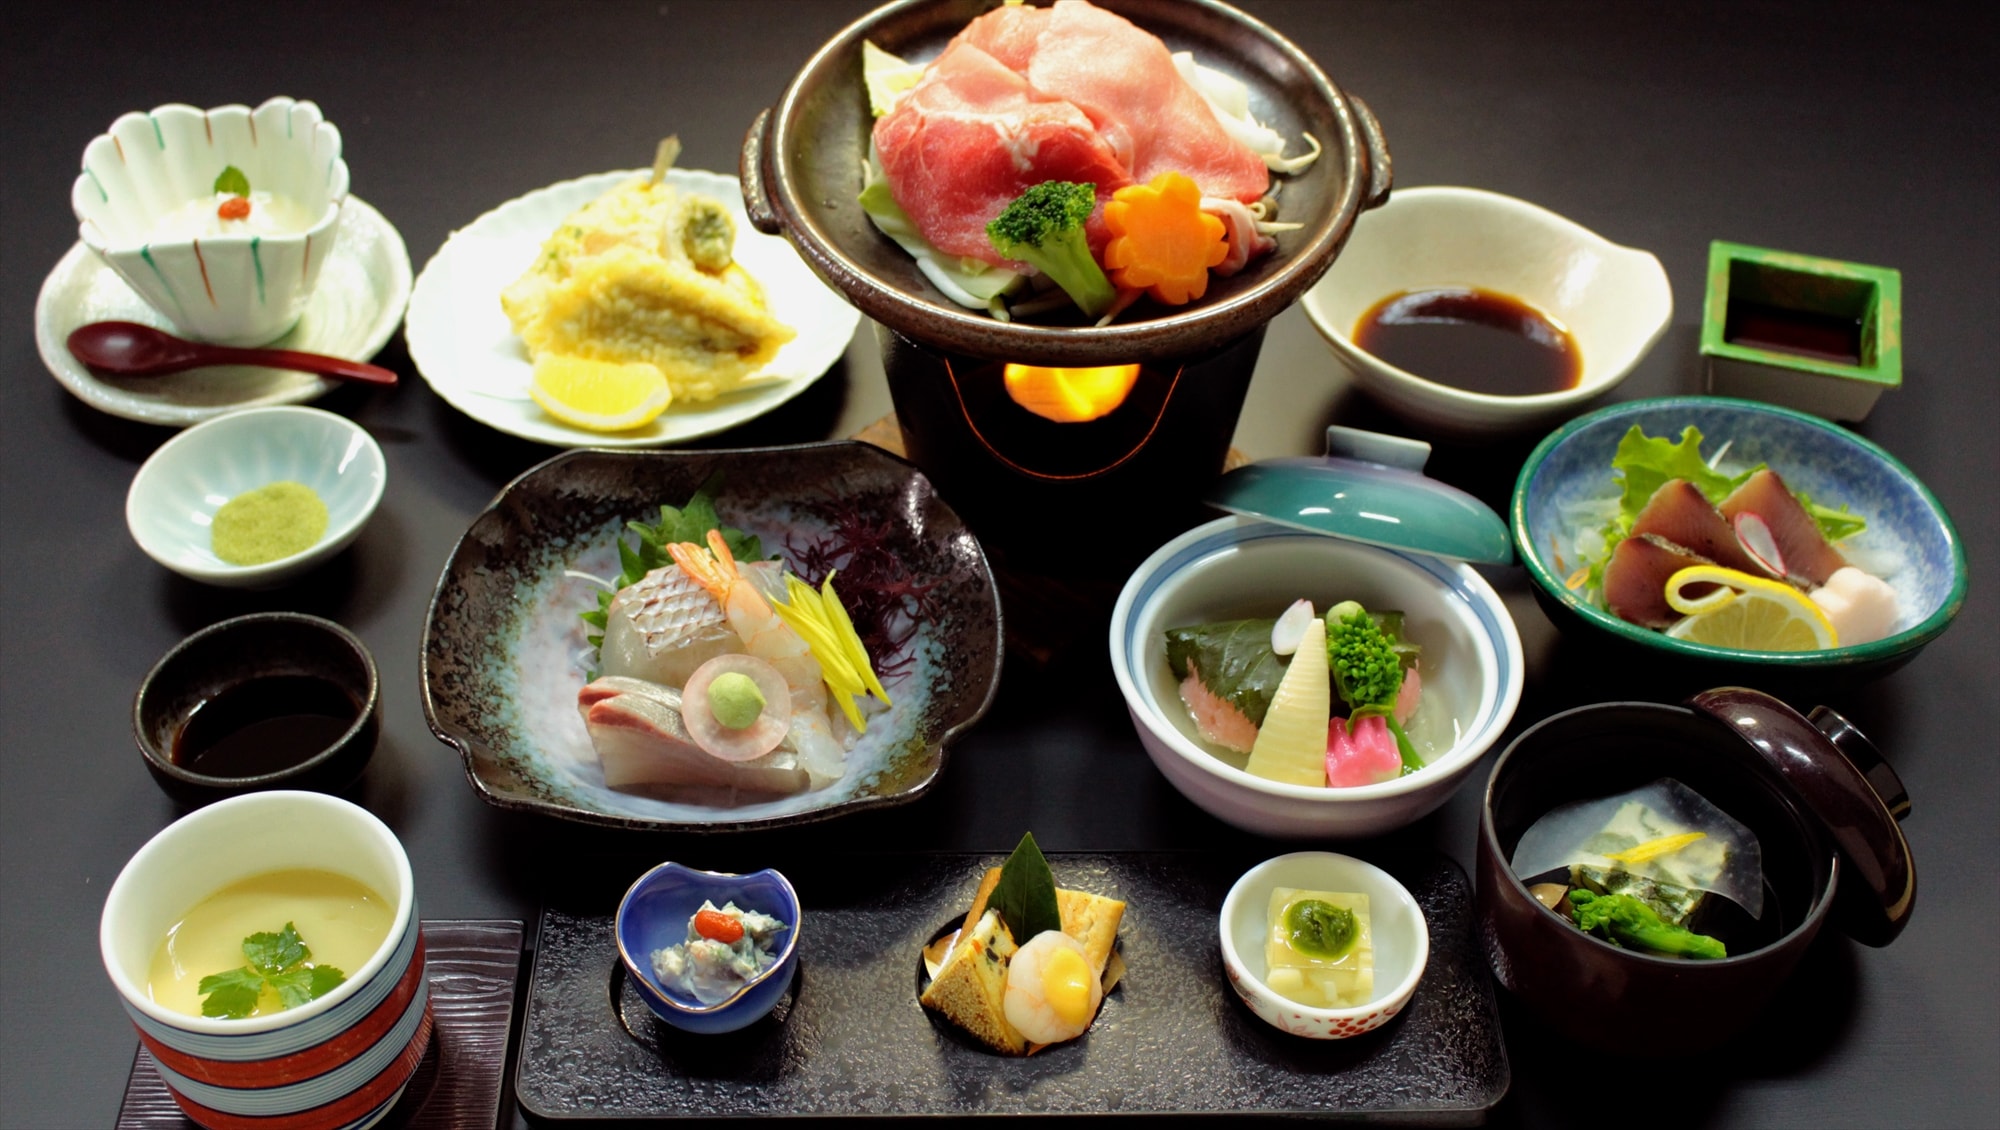 This is the basic course of "Standard Kaiseki Cuisine". * The contents will change depending on the season and purchasing status of the ingredients.